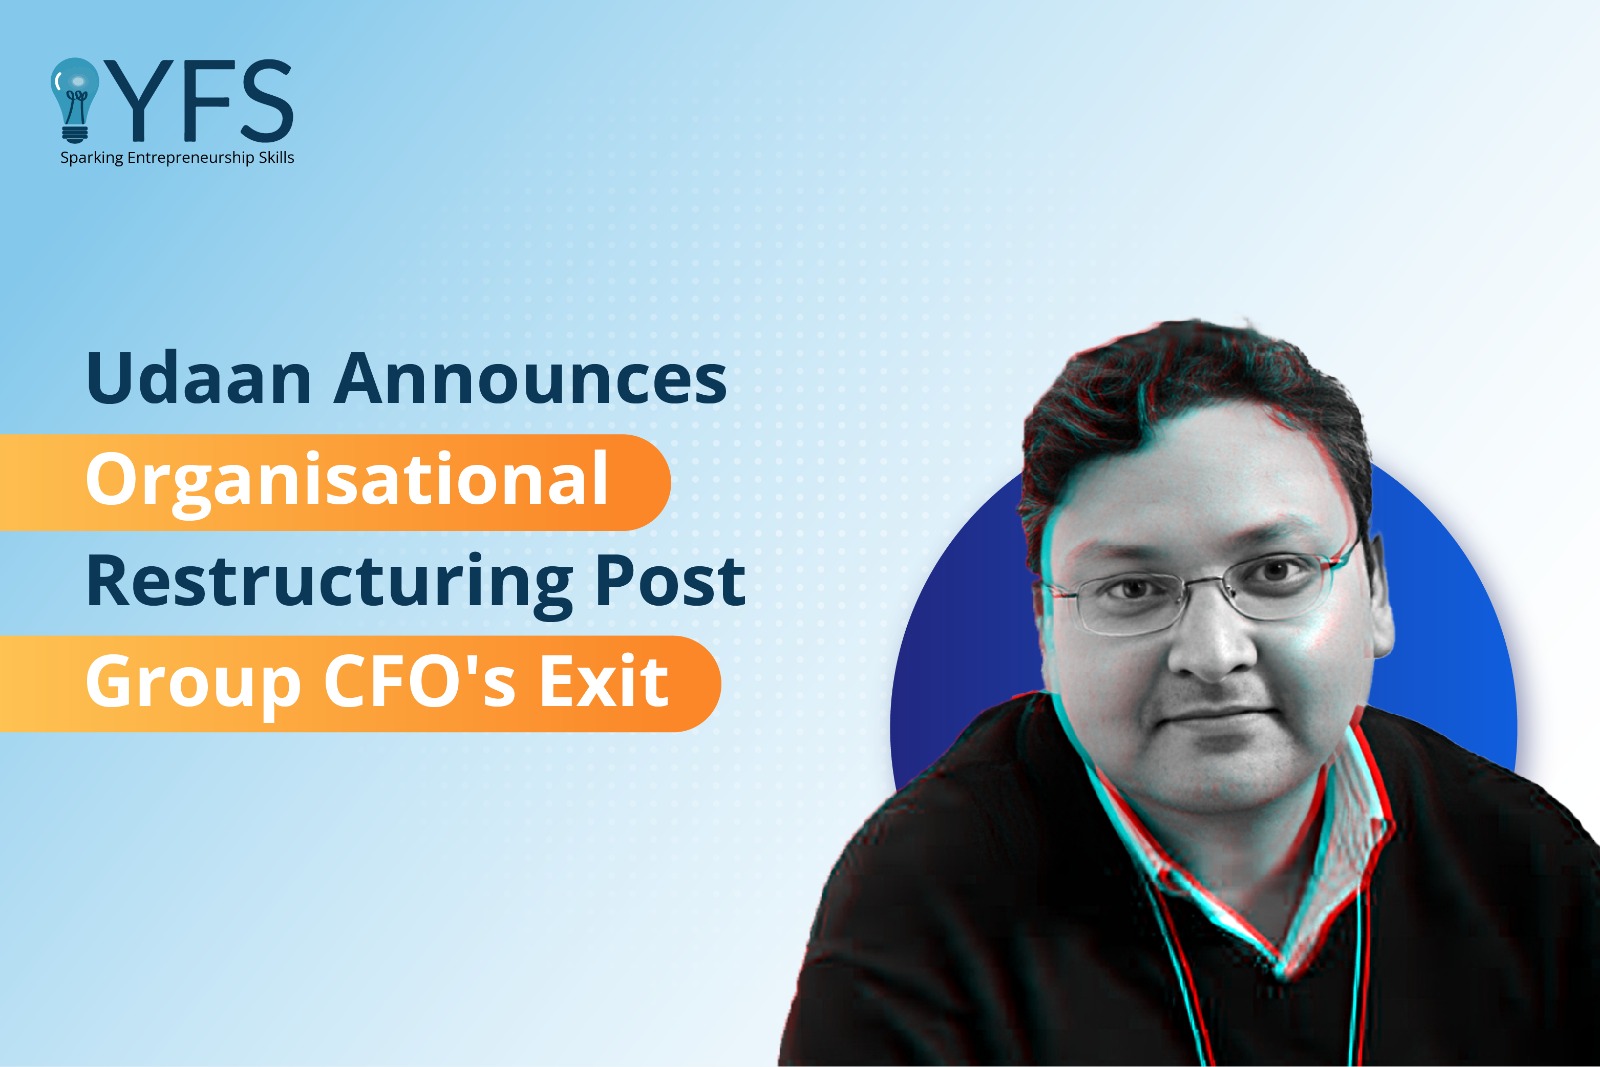 Udaan Announces Organisational Restructuring Post Group CFO's Exit